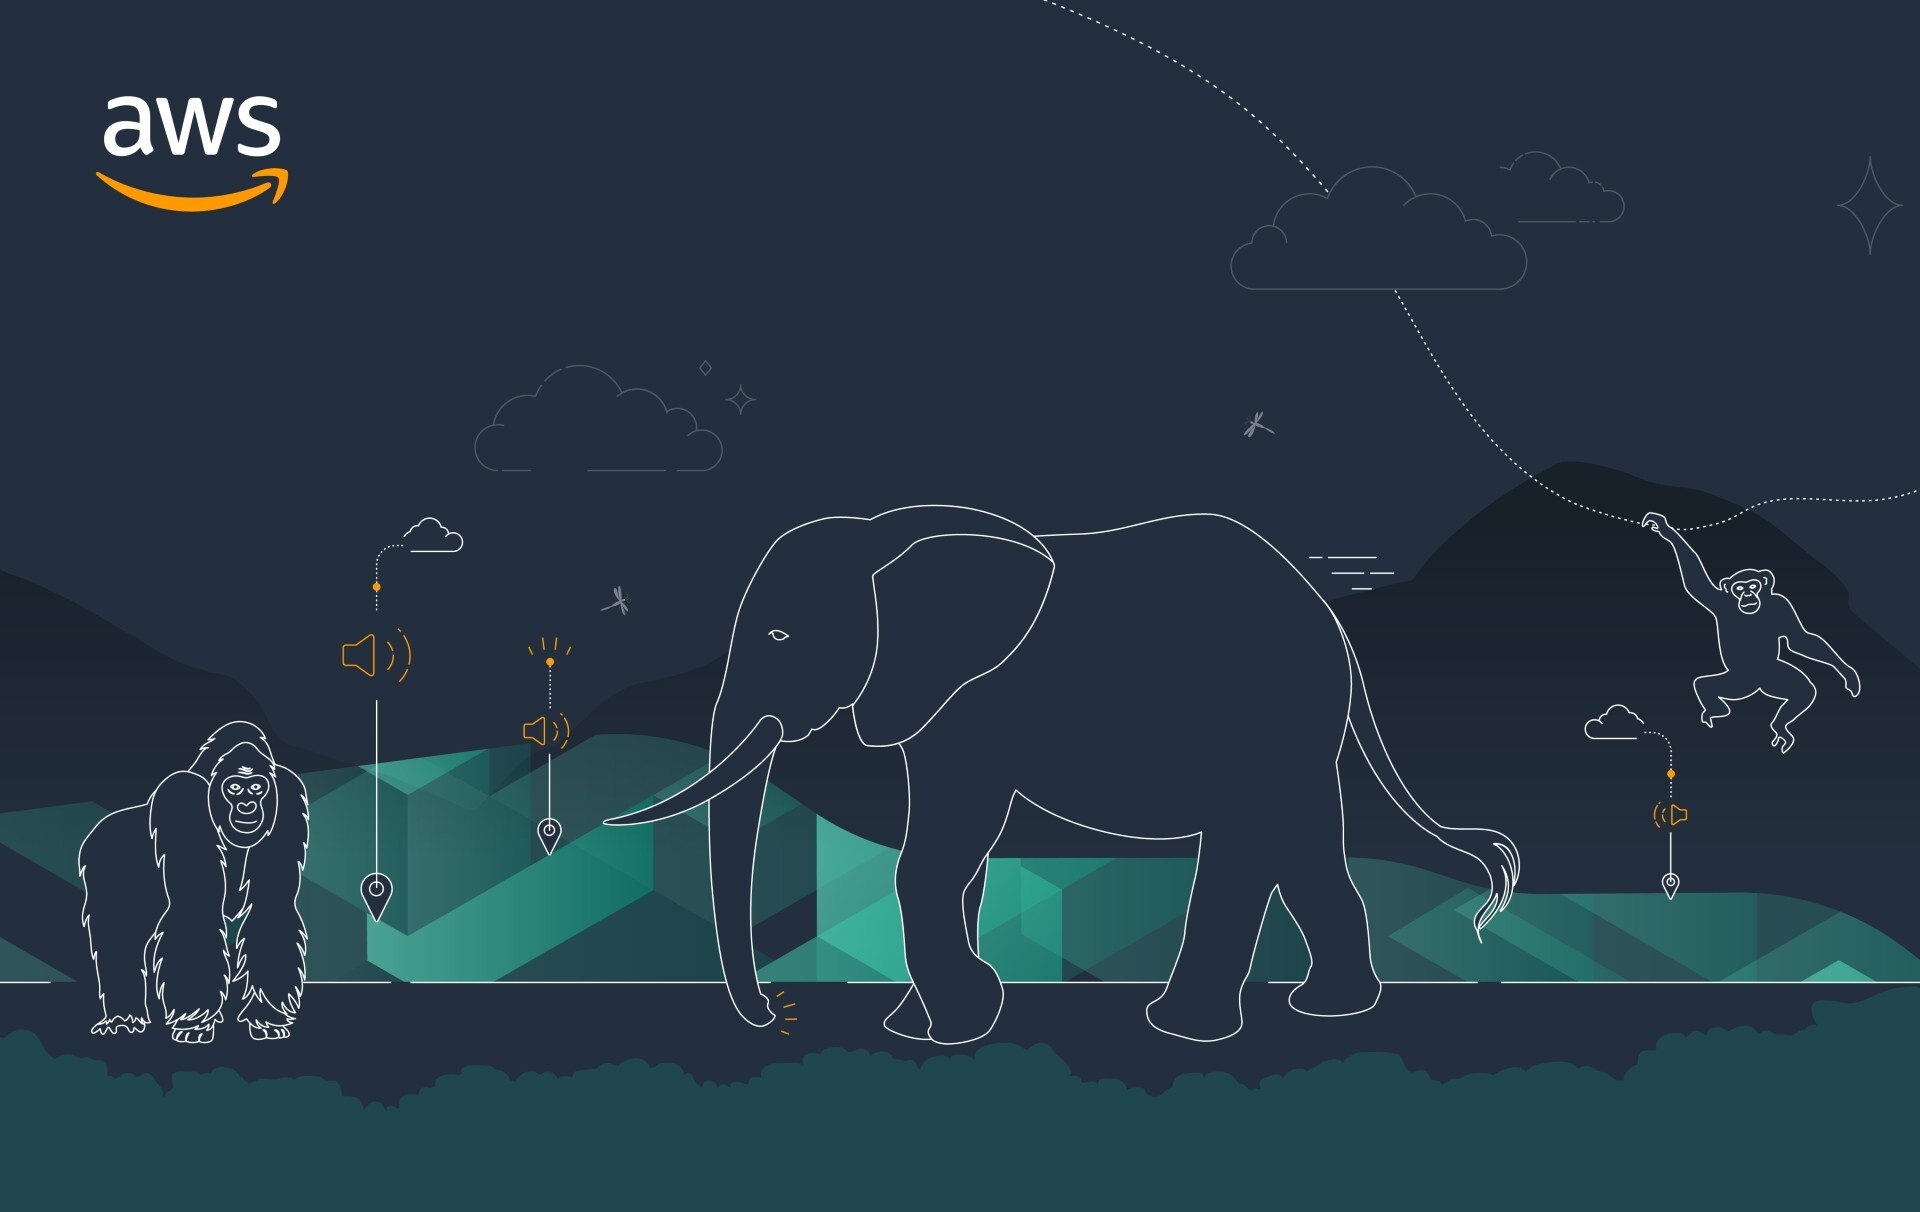 Graphics of a guerilla, elephant and chimpanzee with a dark navy background. Between the animals are small graphics of clouds with a dropdown to a speaker icon with the last drop down to a location pin icon where each animal is.